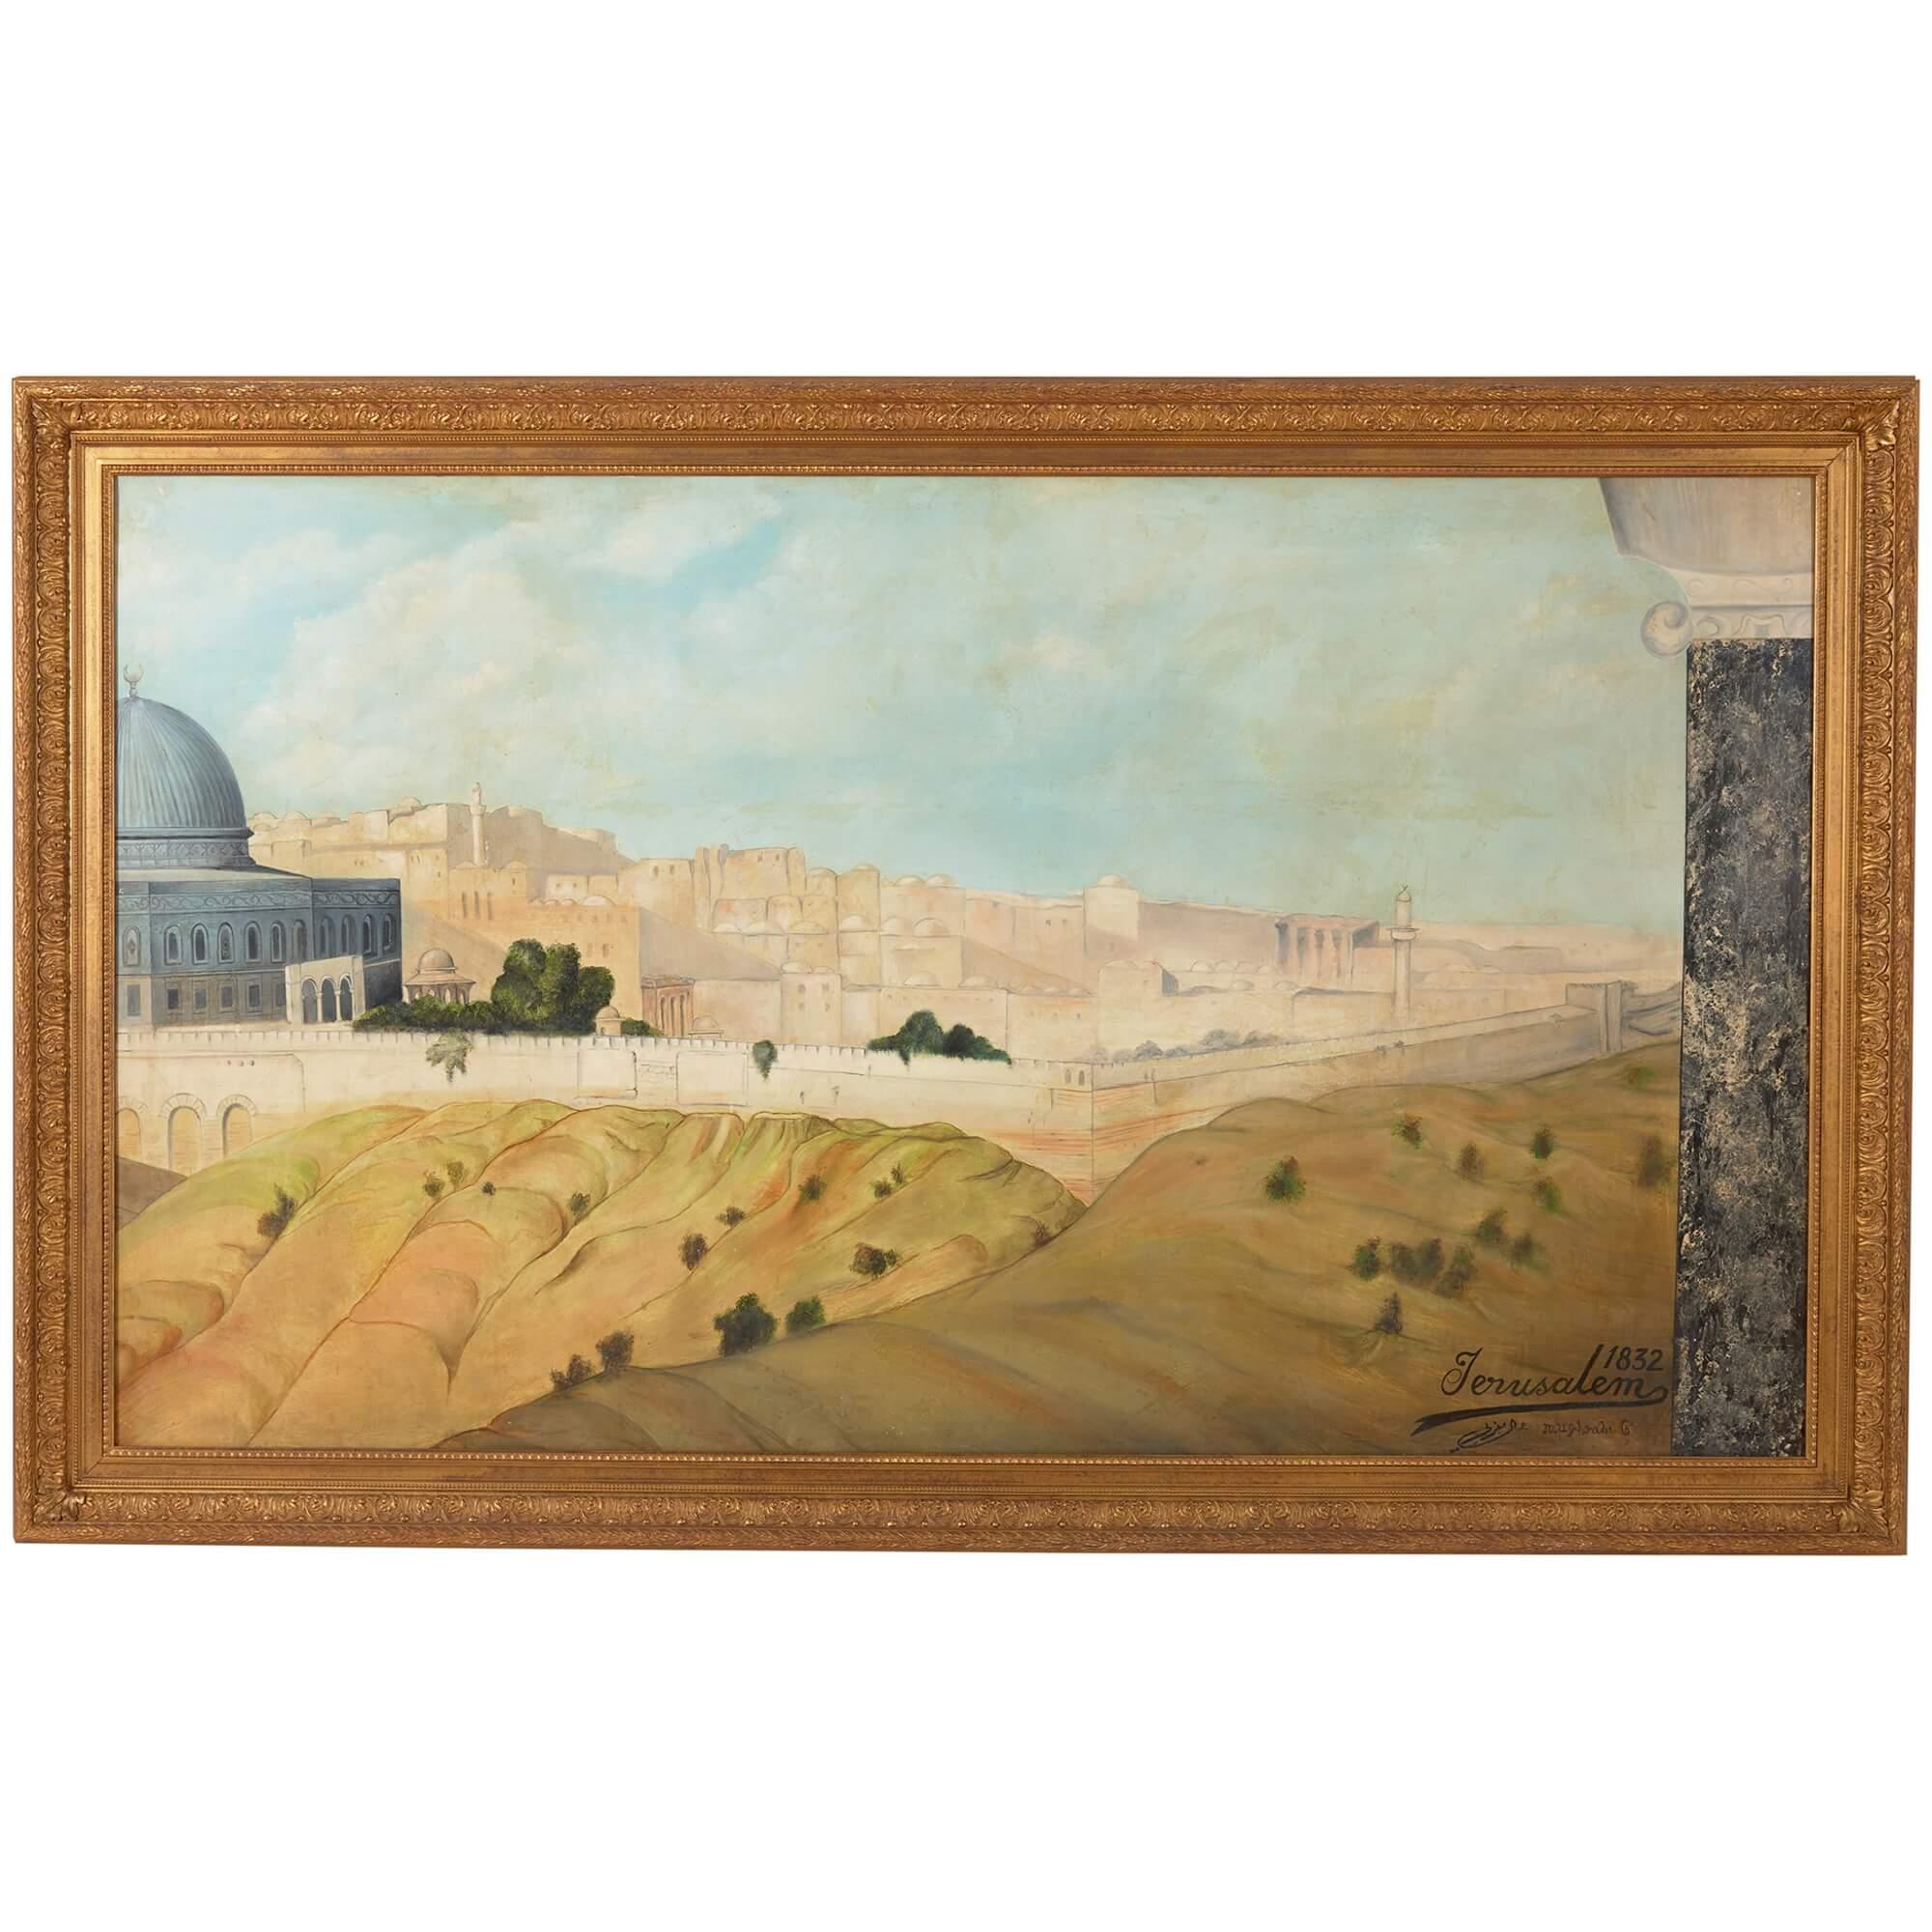 Pair of large paintings of Jerusalem from the Mount of Olives
Continental, c.1920
Frames: height 129cm, width 206cm, 7cm
Panels: height 110cm, width 188cm

These wonderful paintings - or rather single painting, split across two panels - depict the